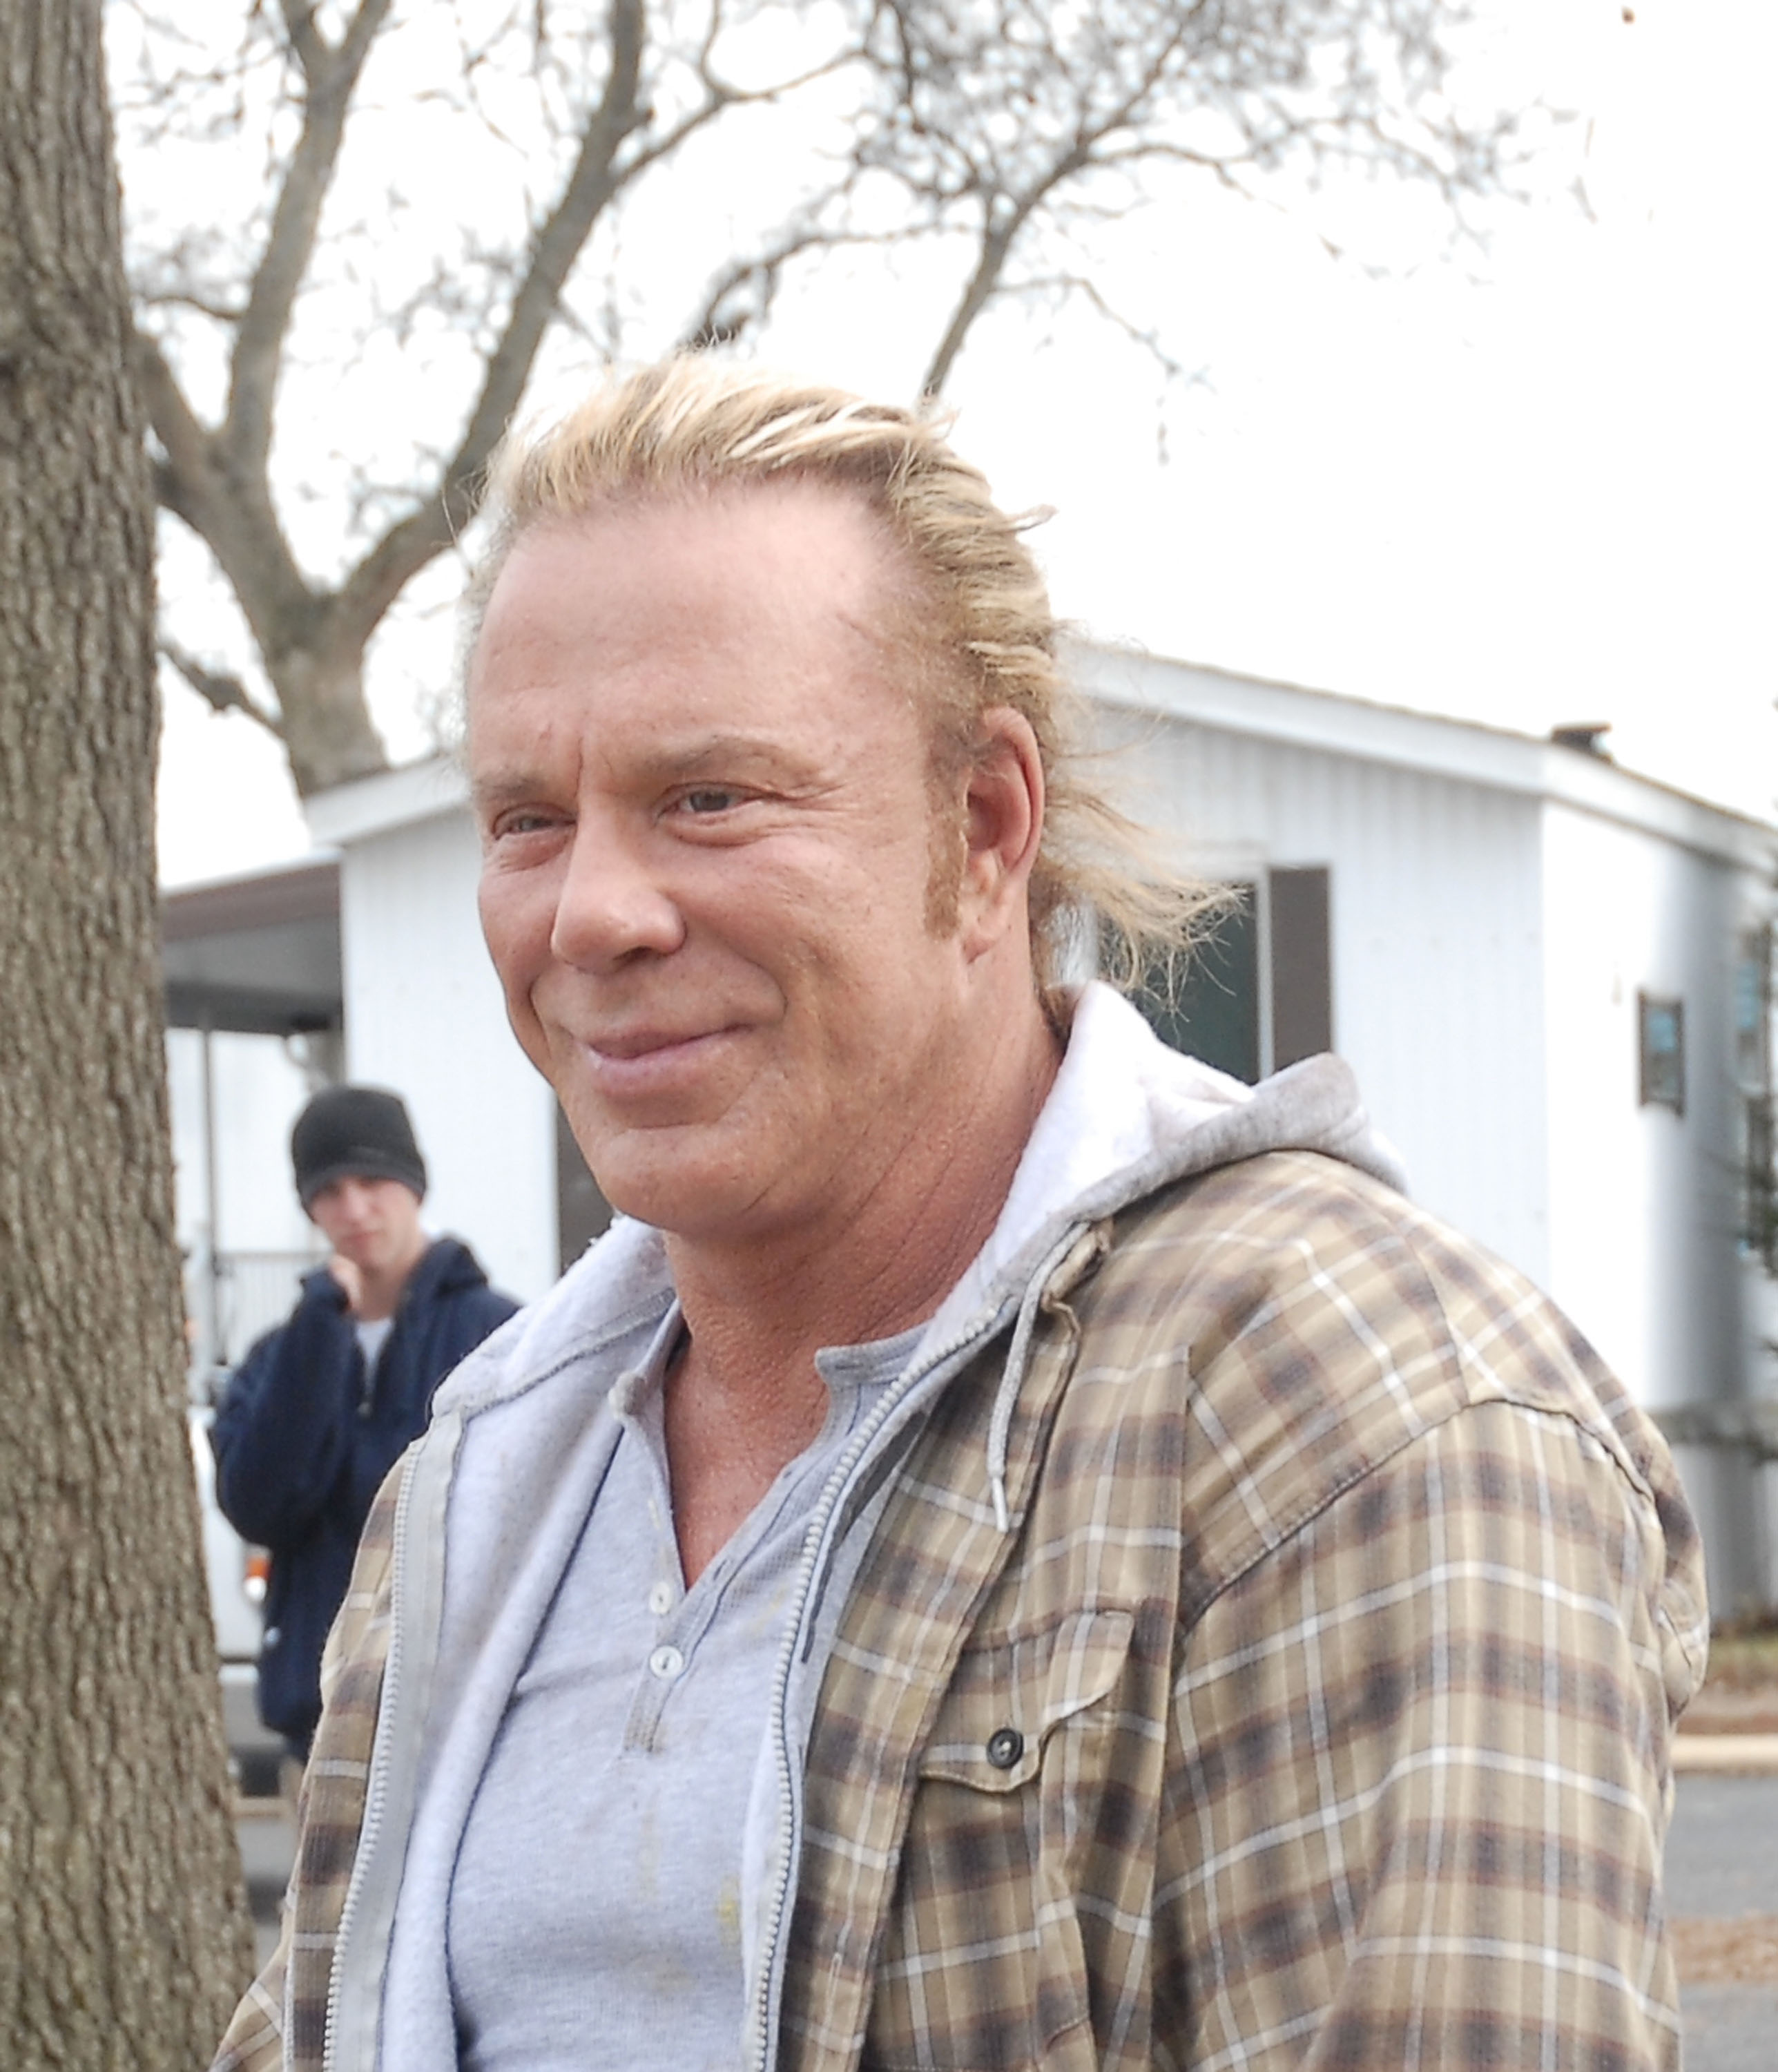 Mickey Rourke on location for "The Wrestler" on February 15 2008 in Keansburg New Jersey. | Source: Getty Images